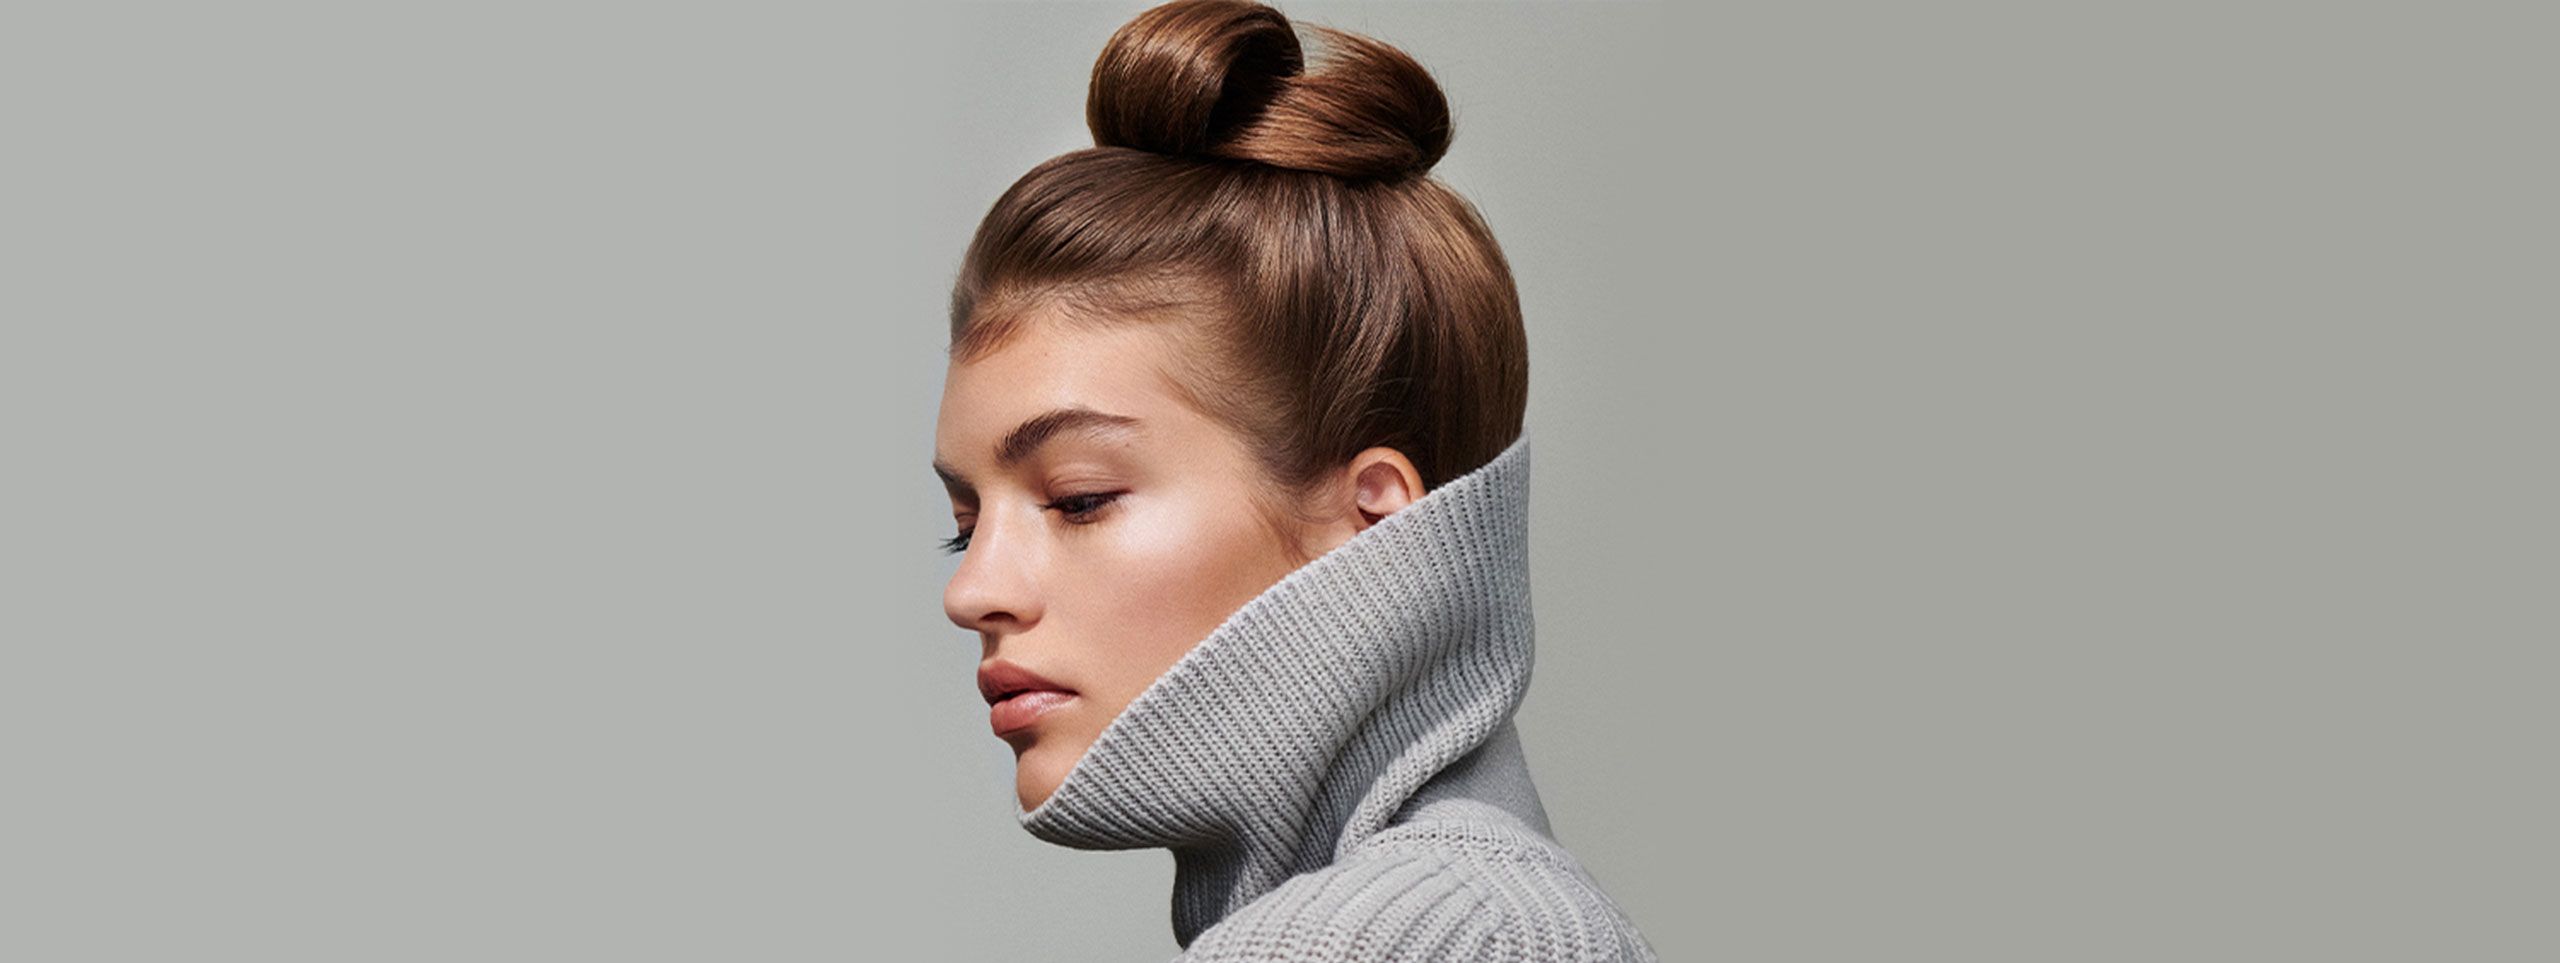 Woman with turtleneck and shoulder-lenght hair